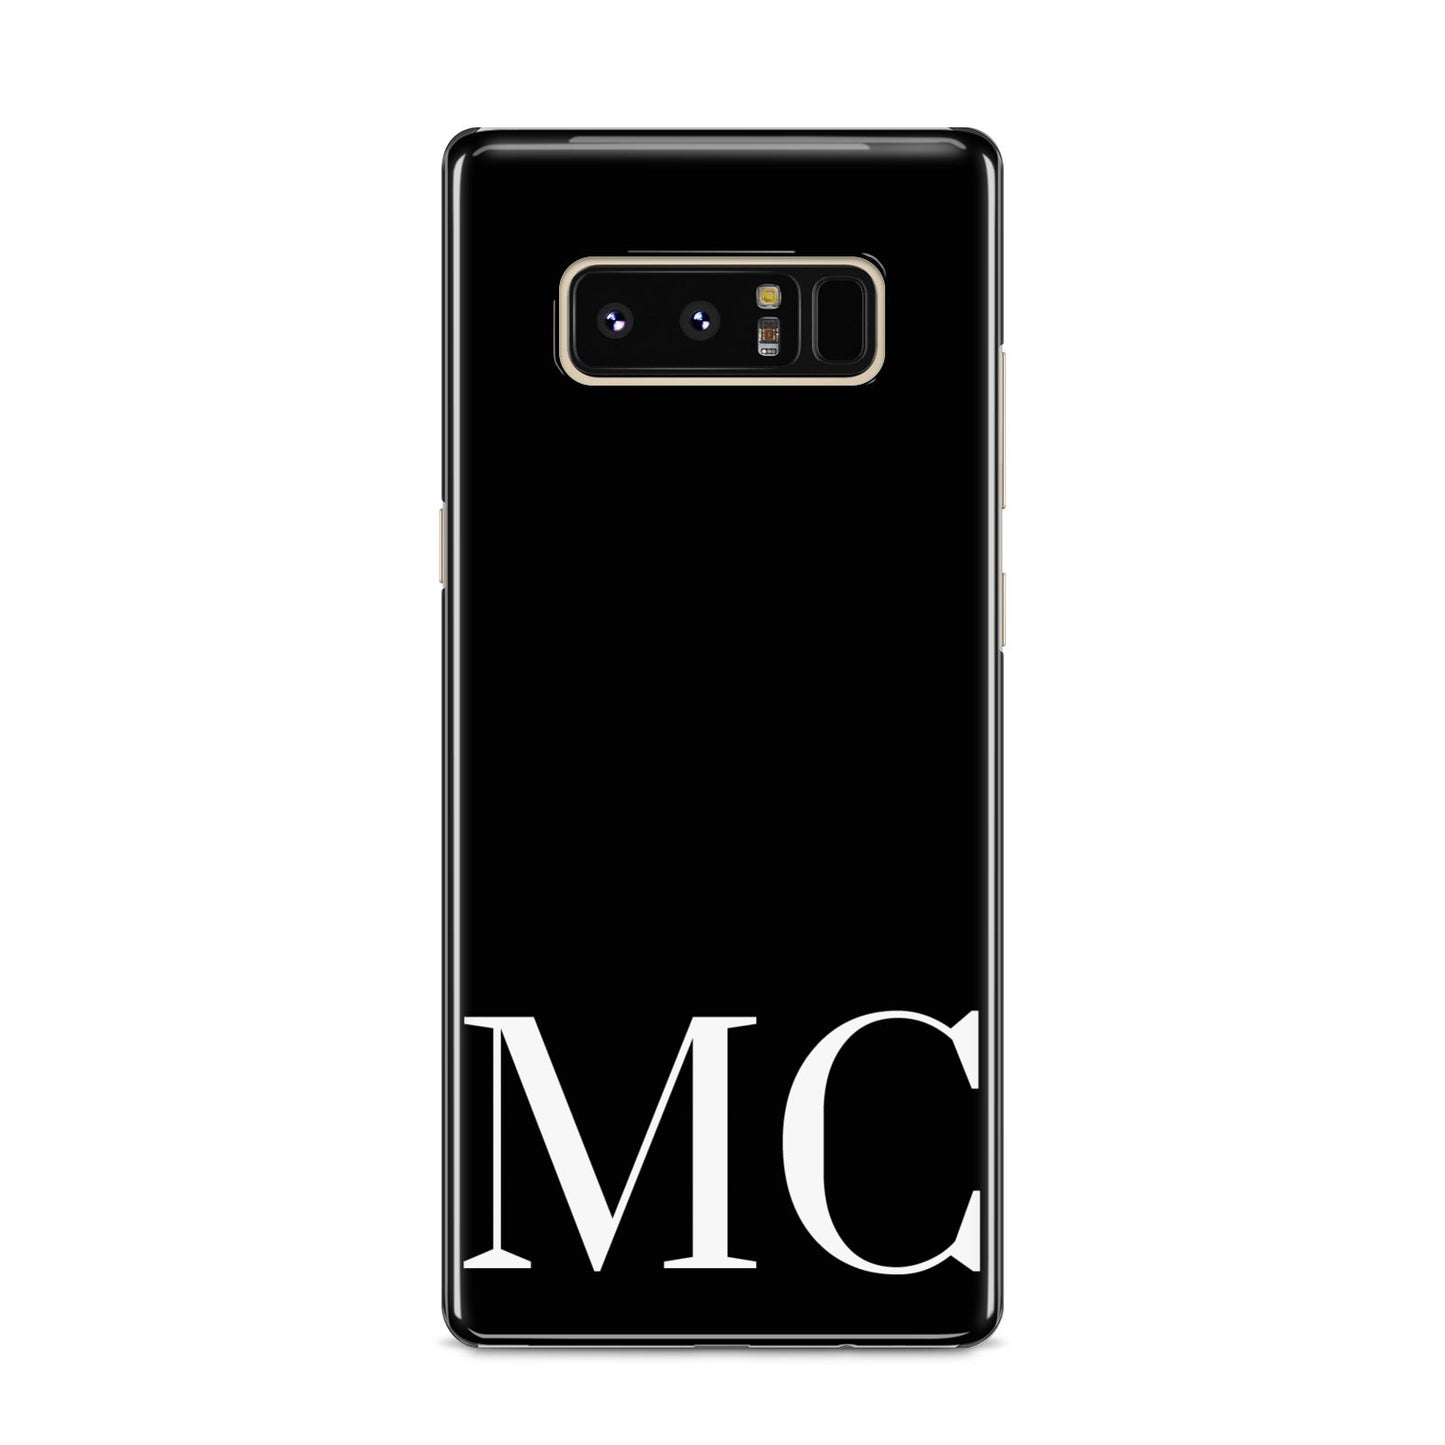 Initials Personalised 1 Samsung Galaxy S8 Case